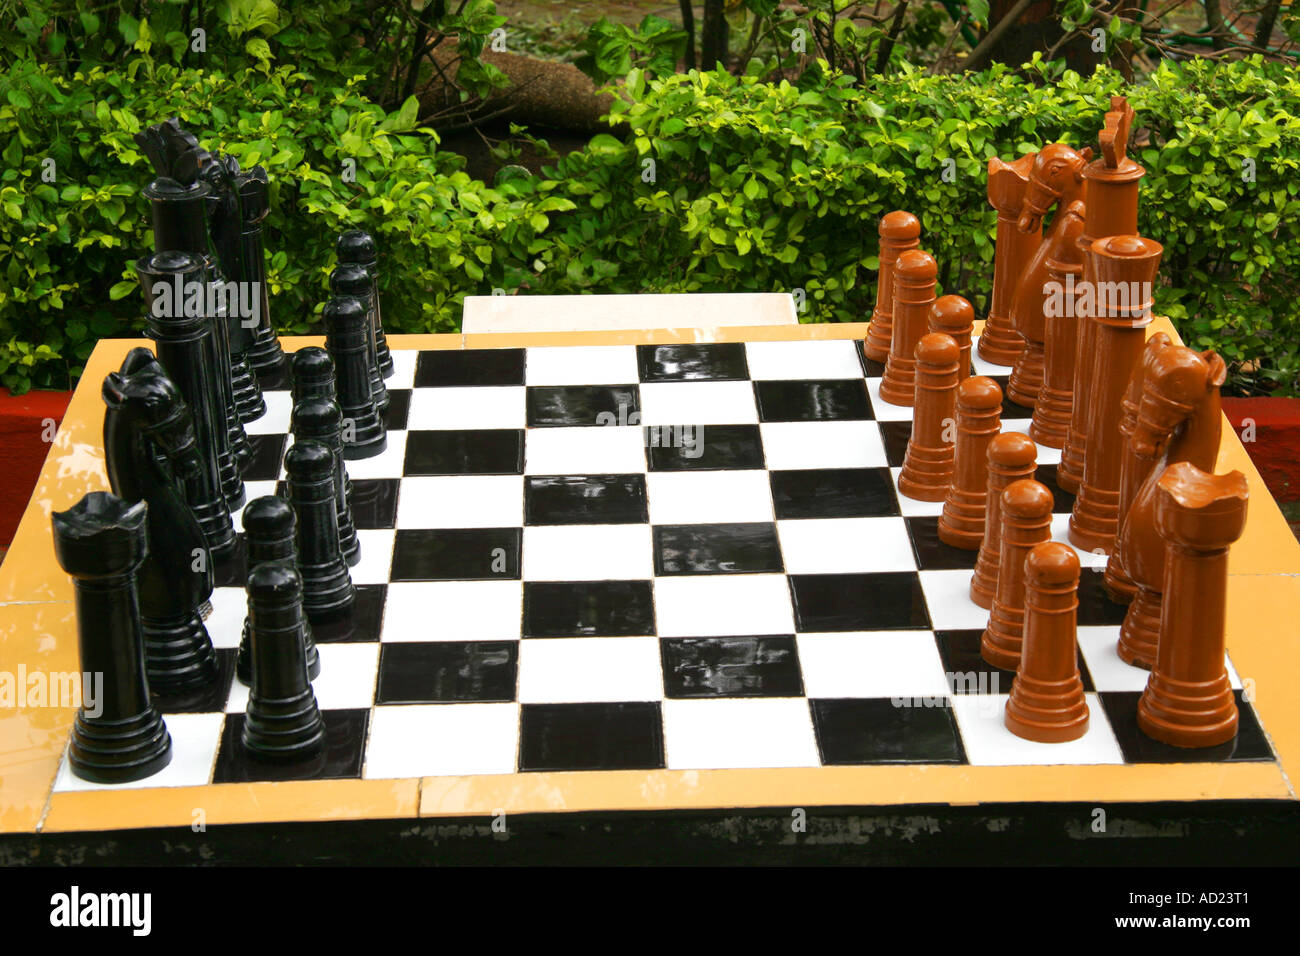 Chess Board with playing pieces, the chess board is made of ceramic tiles and pieces of wood, India Stock Photo